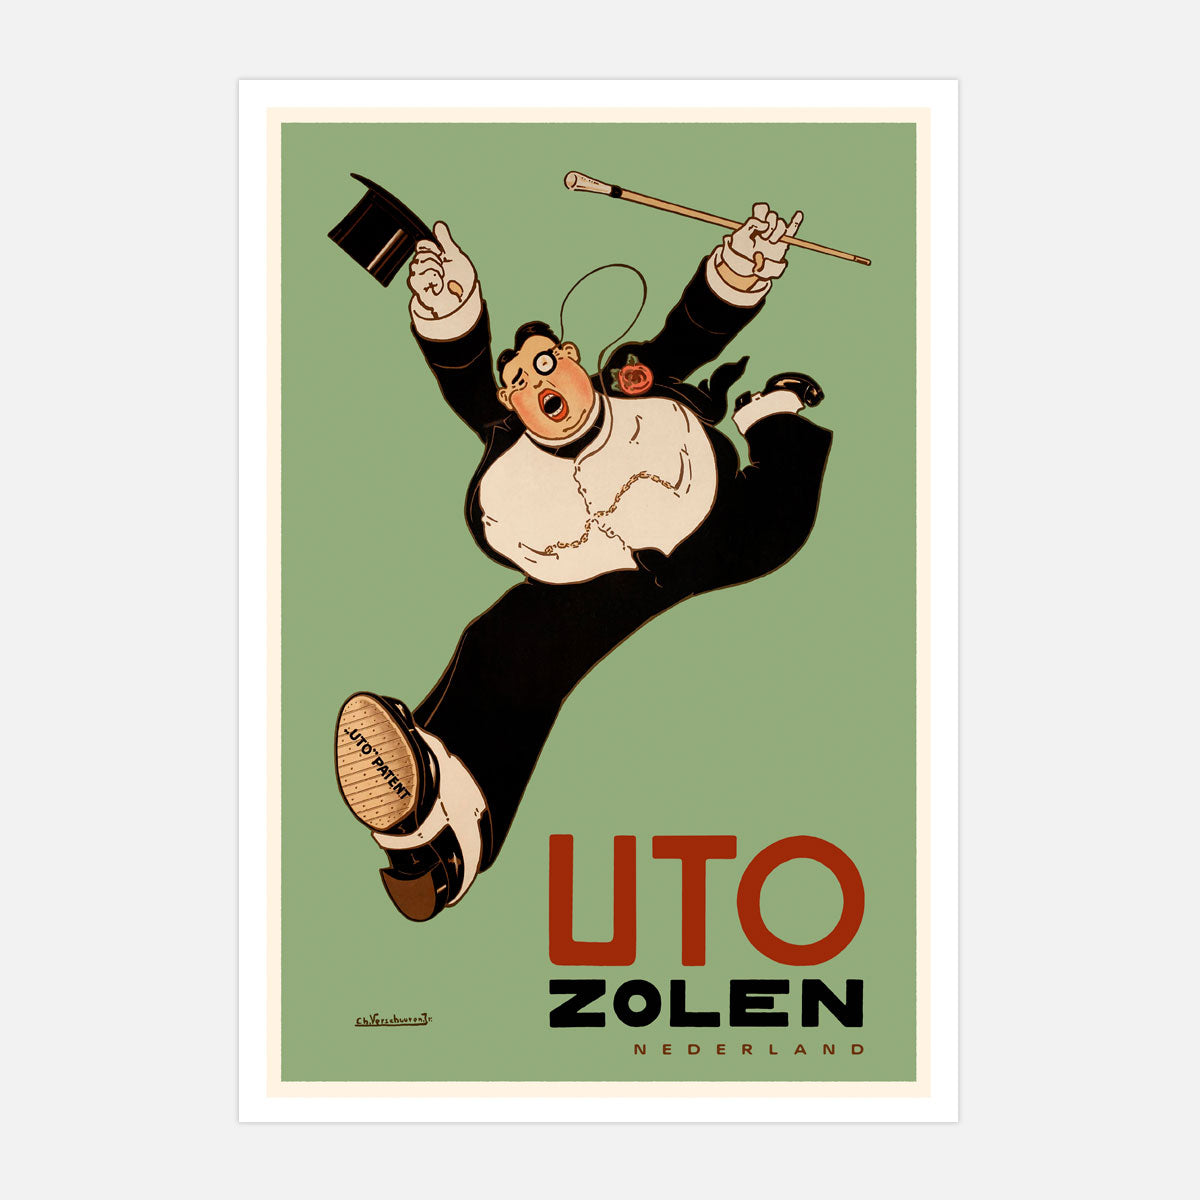 Uto Zolen The Netherlands retro vintage poster from Places We Luv